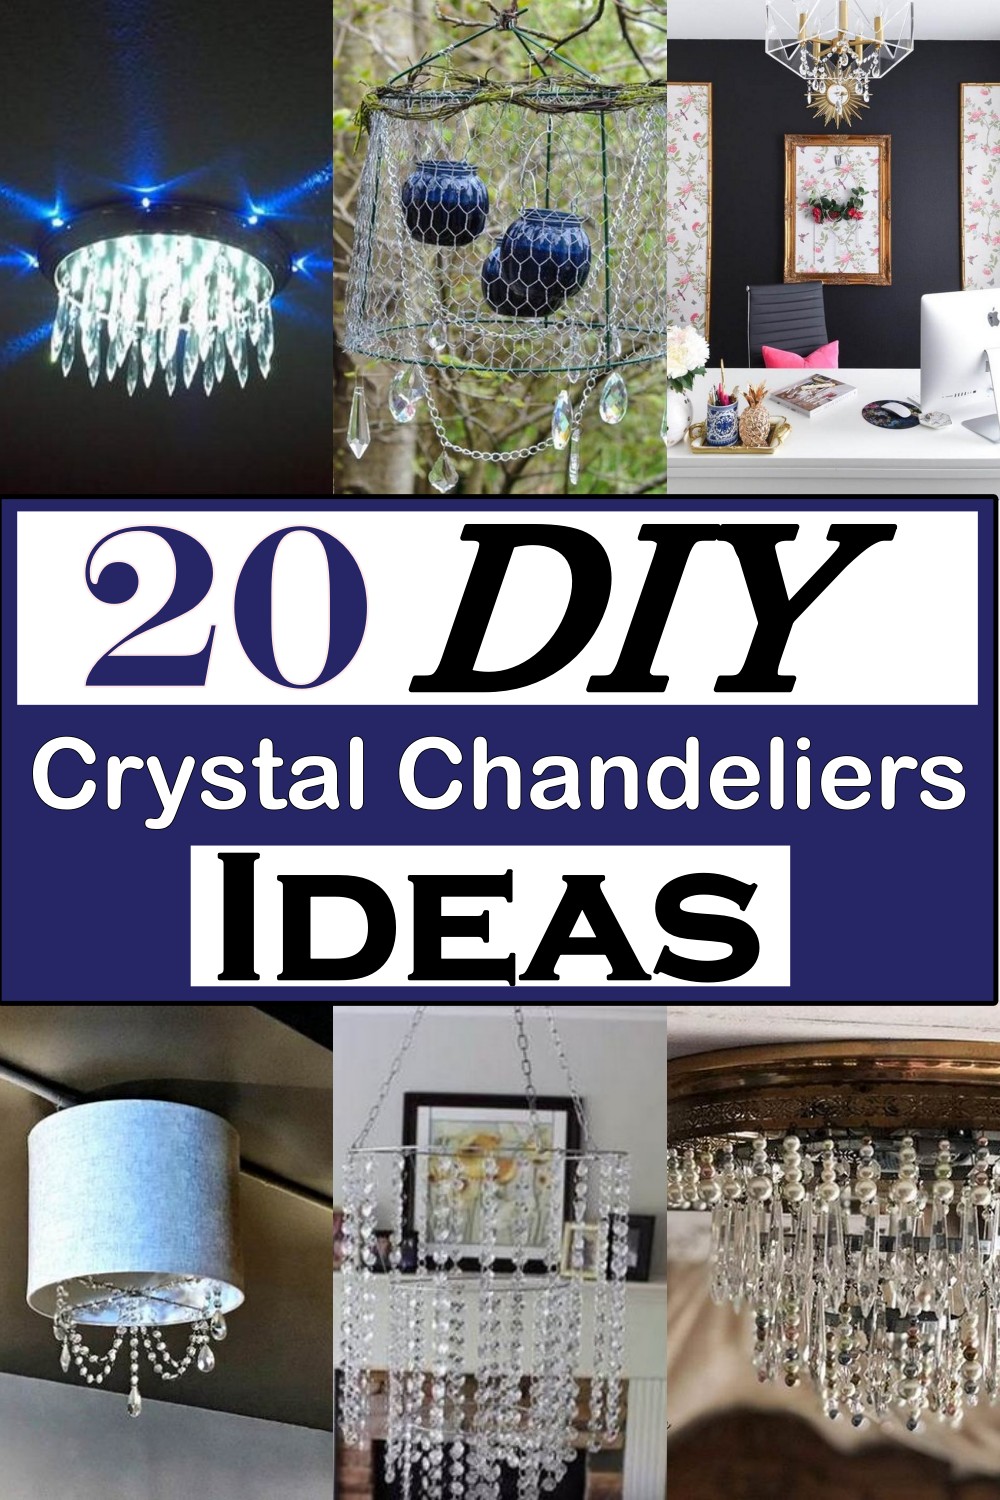 These DIY crystal chandeliers are easy to make and are a great way to add some style and glamour to your home.